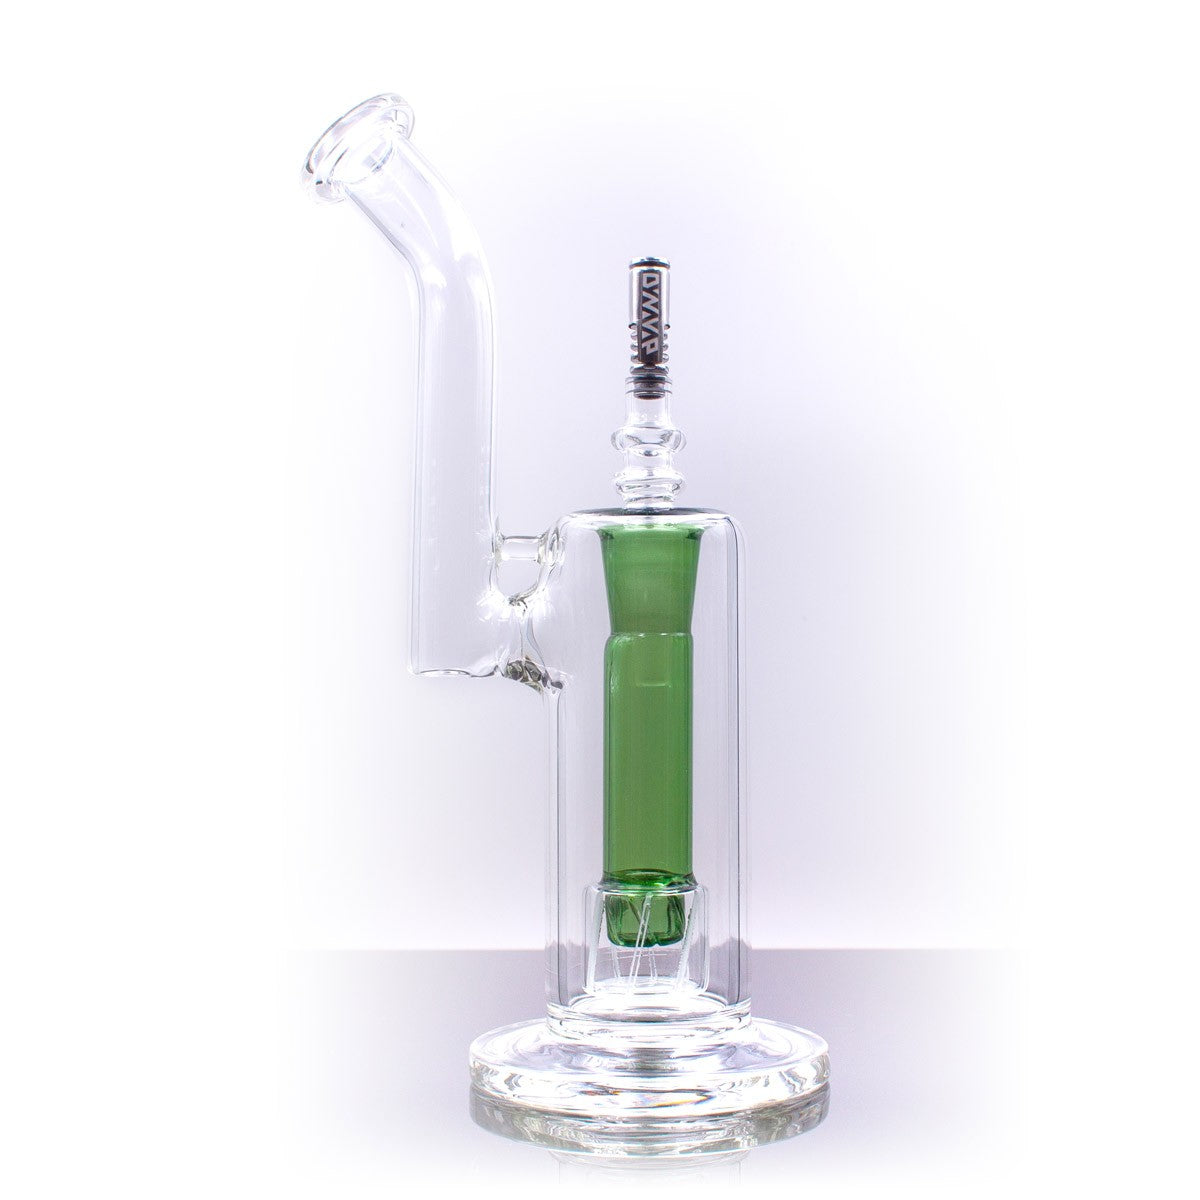 The Stash Shack - Universal Glass Adapter for DynaVap, clear with green accent, front view